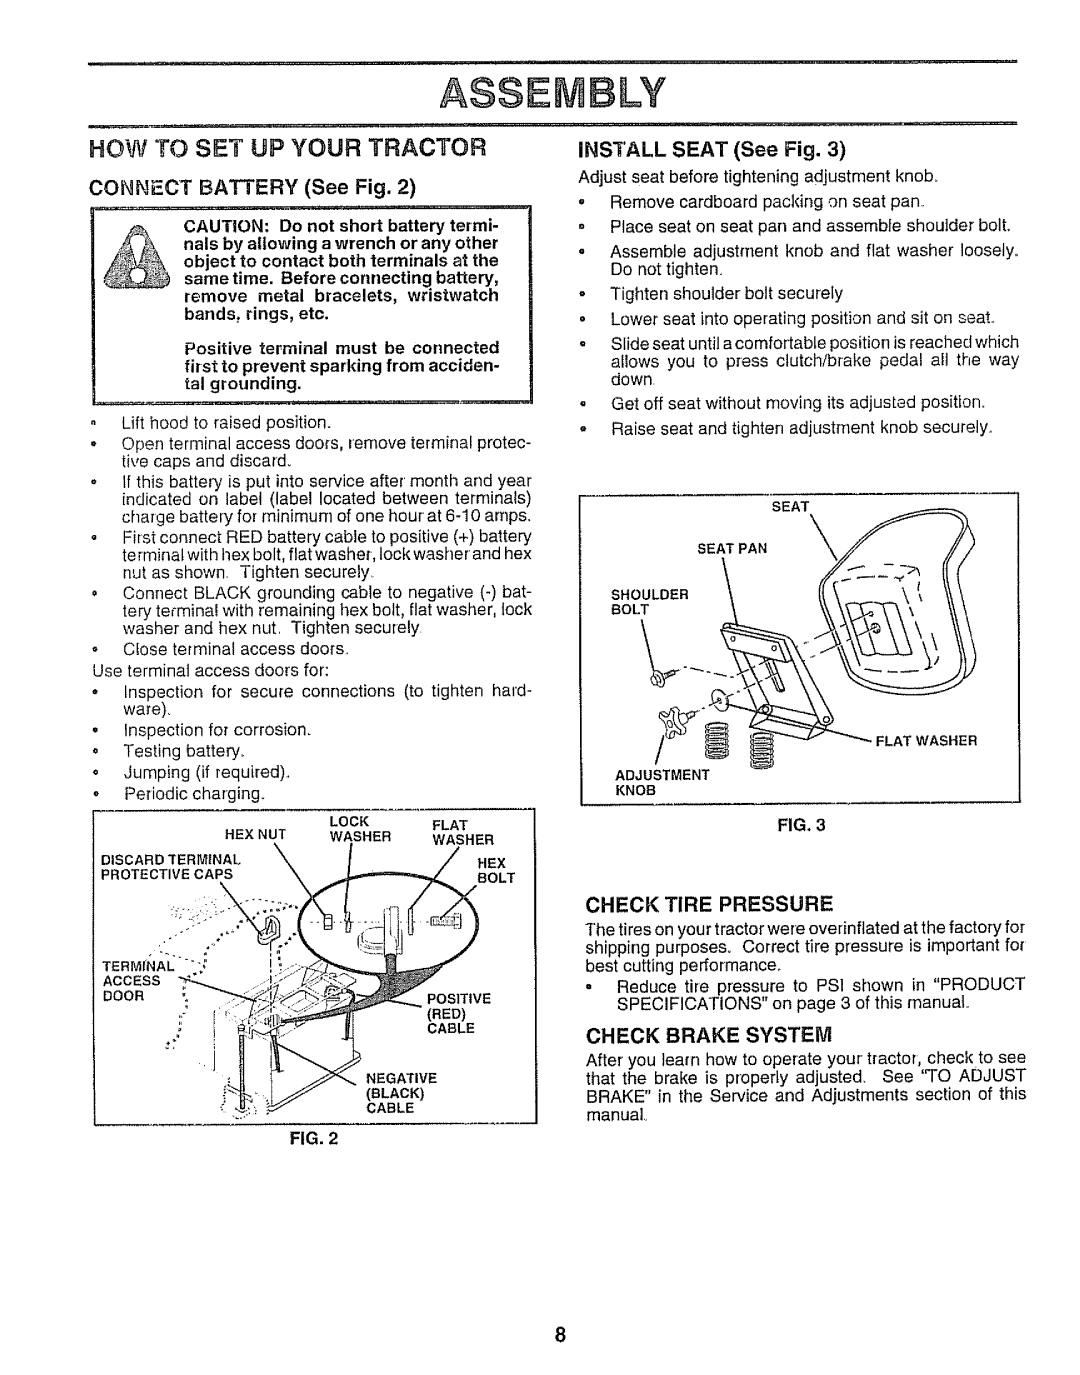 Sears 917.25958 manual How To Set Up Your Tractor, CONNECT BATTERY See Fig, INSTALL SEAT See Fig 